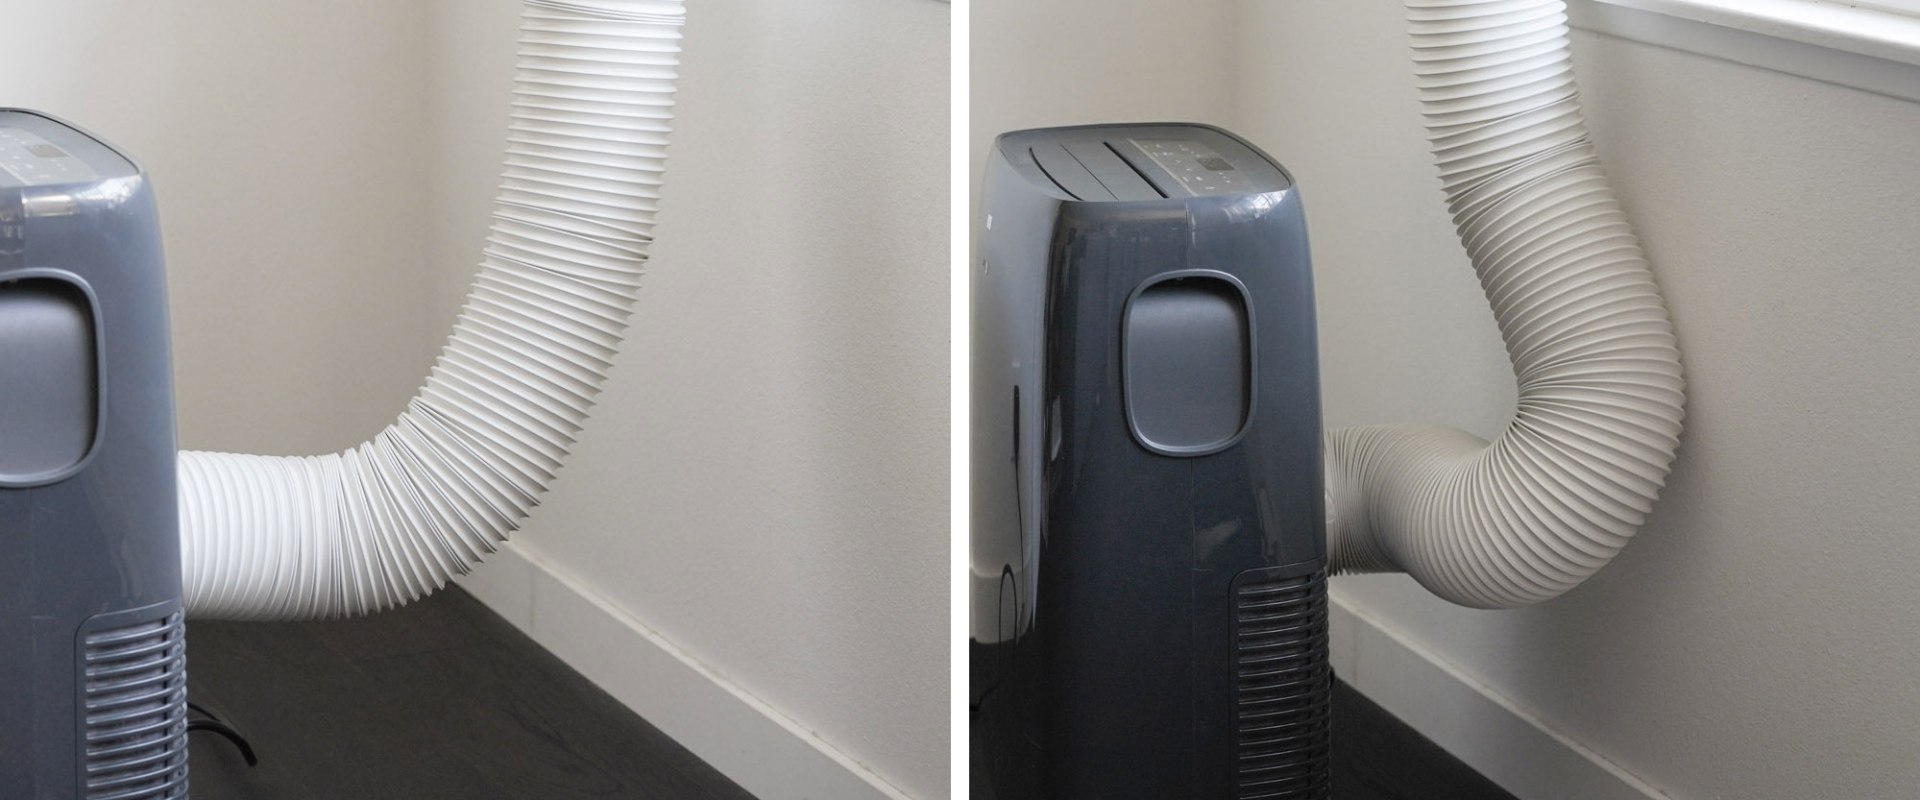 Do Portable Air Conditioners Need to be Vented Out a Window?